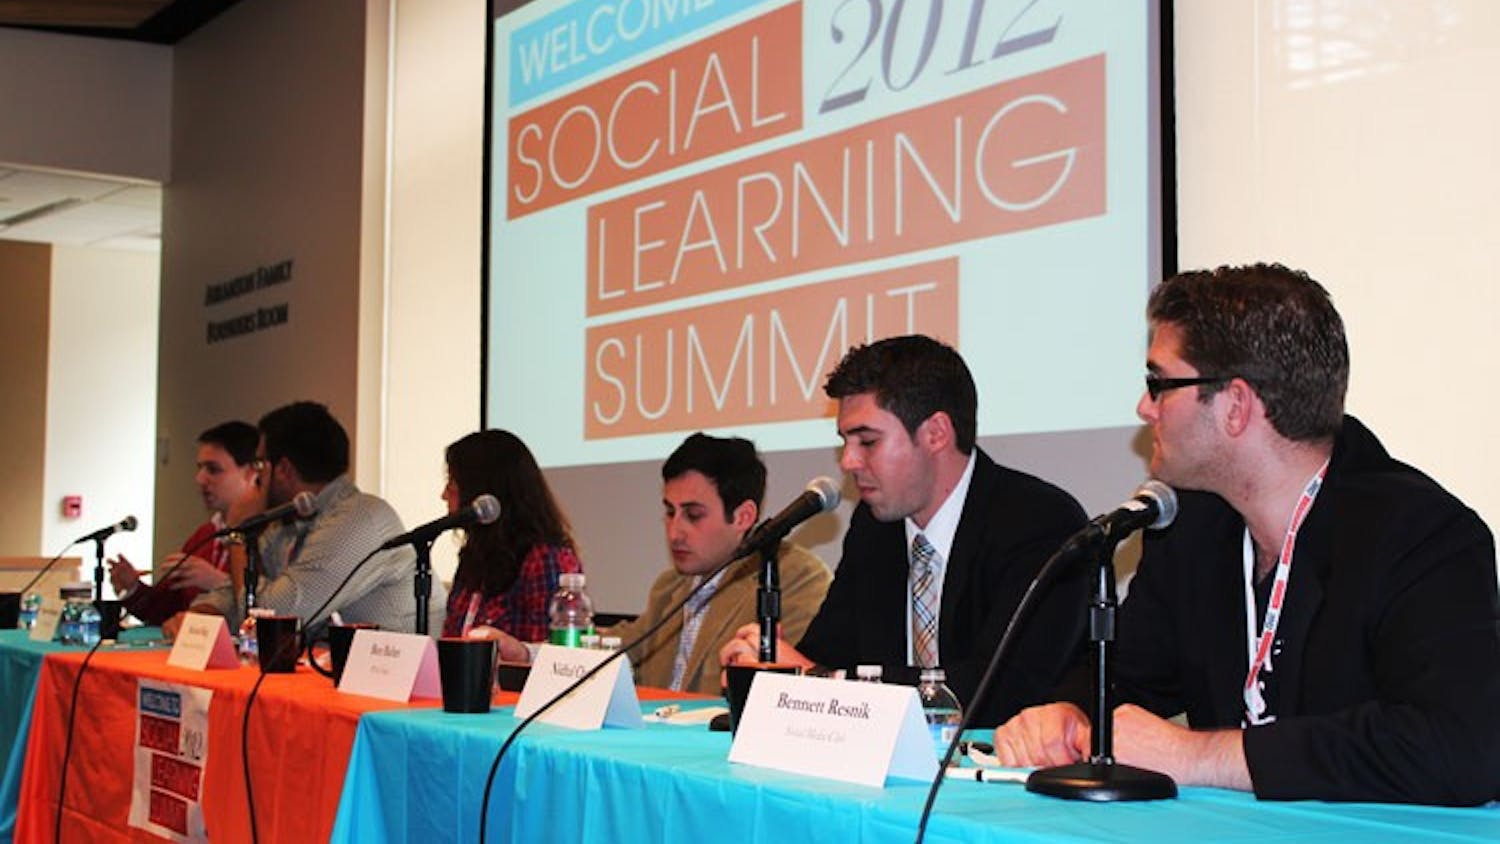 AUâ€™s Social Media Club held its second annual Social Learning Summit March 30-31.